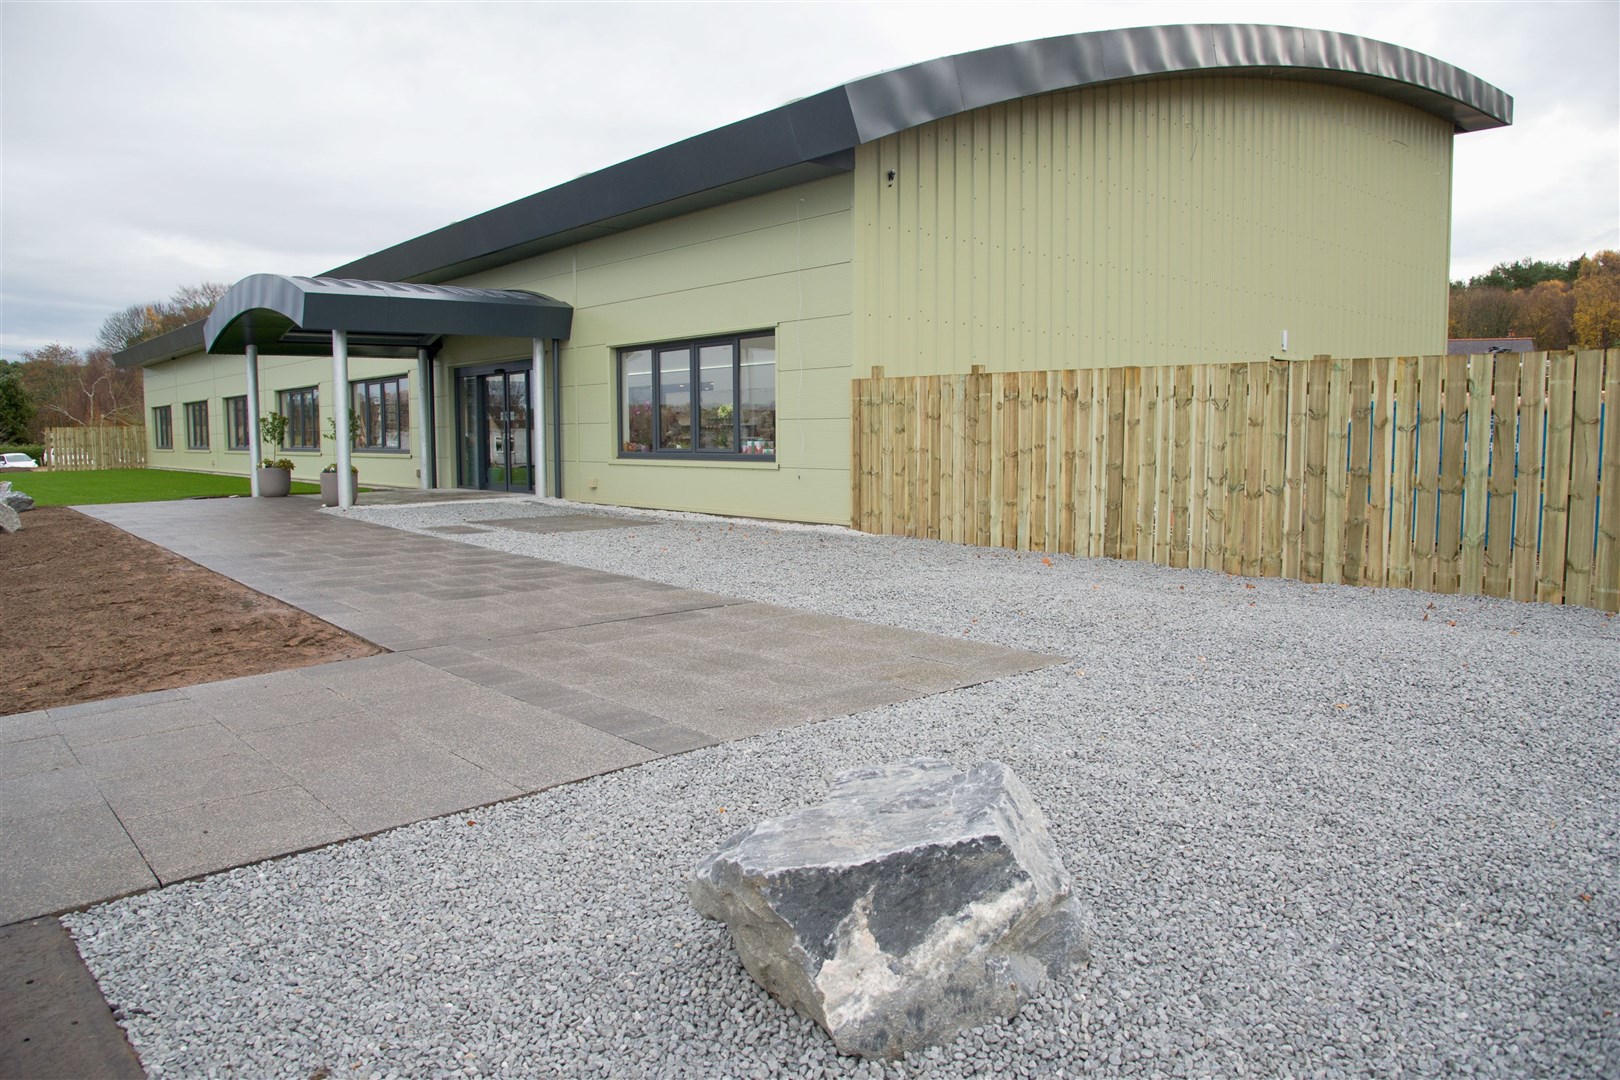 The new Threaplands garden centre which was built in 2018. Picture: Daniel Forsyth